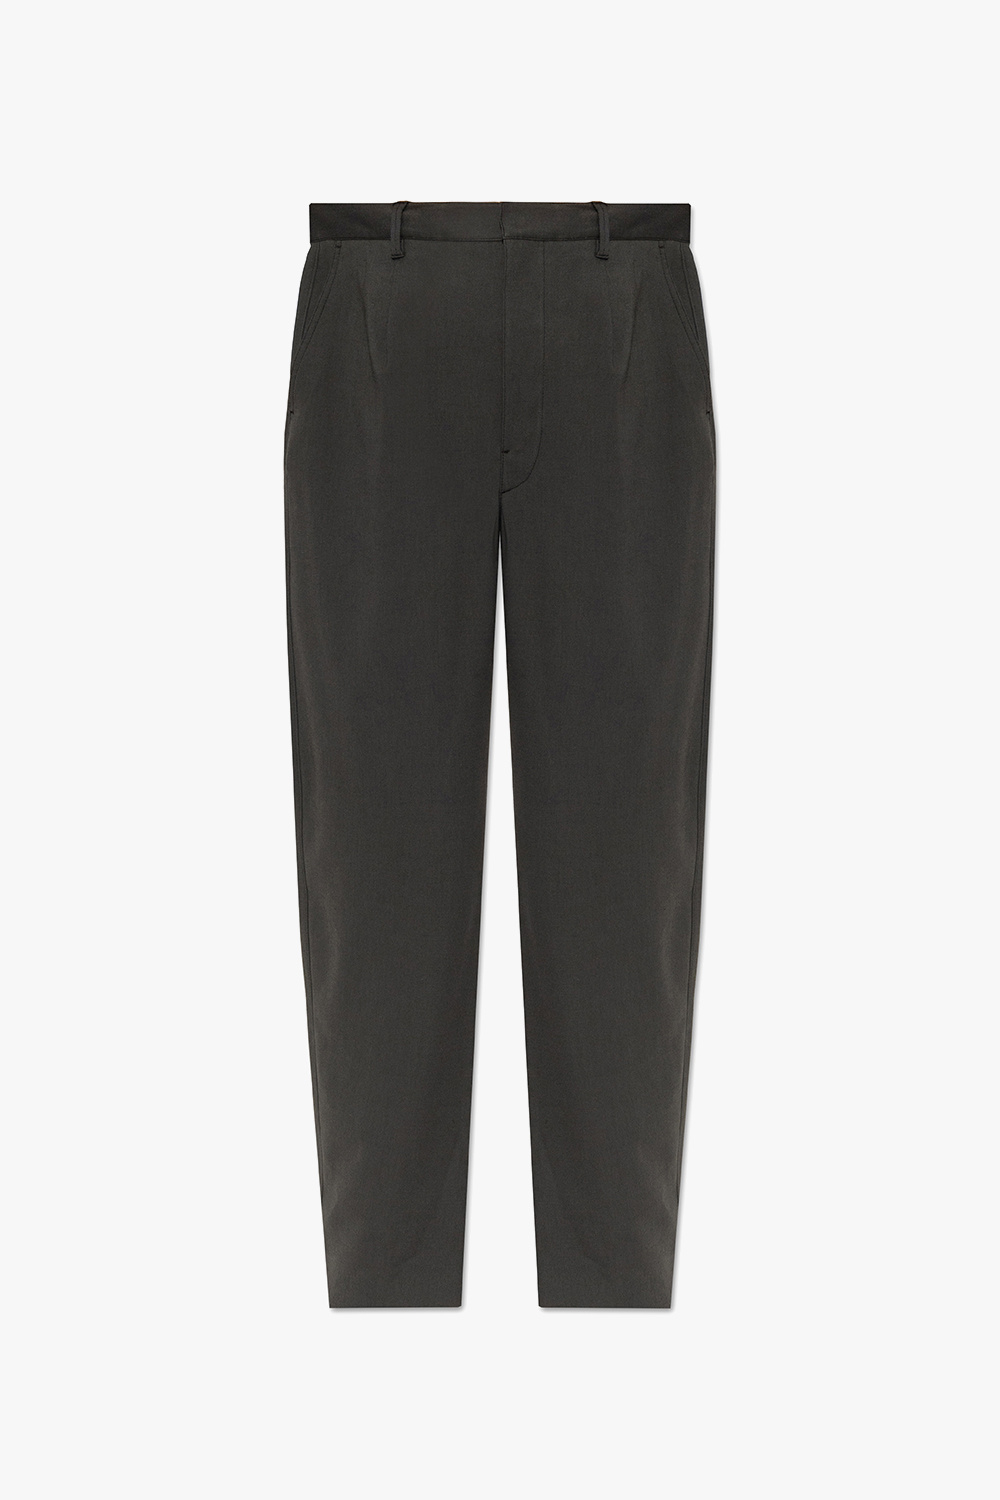 Lemaire Trousers with pockets